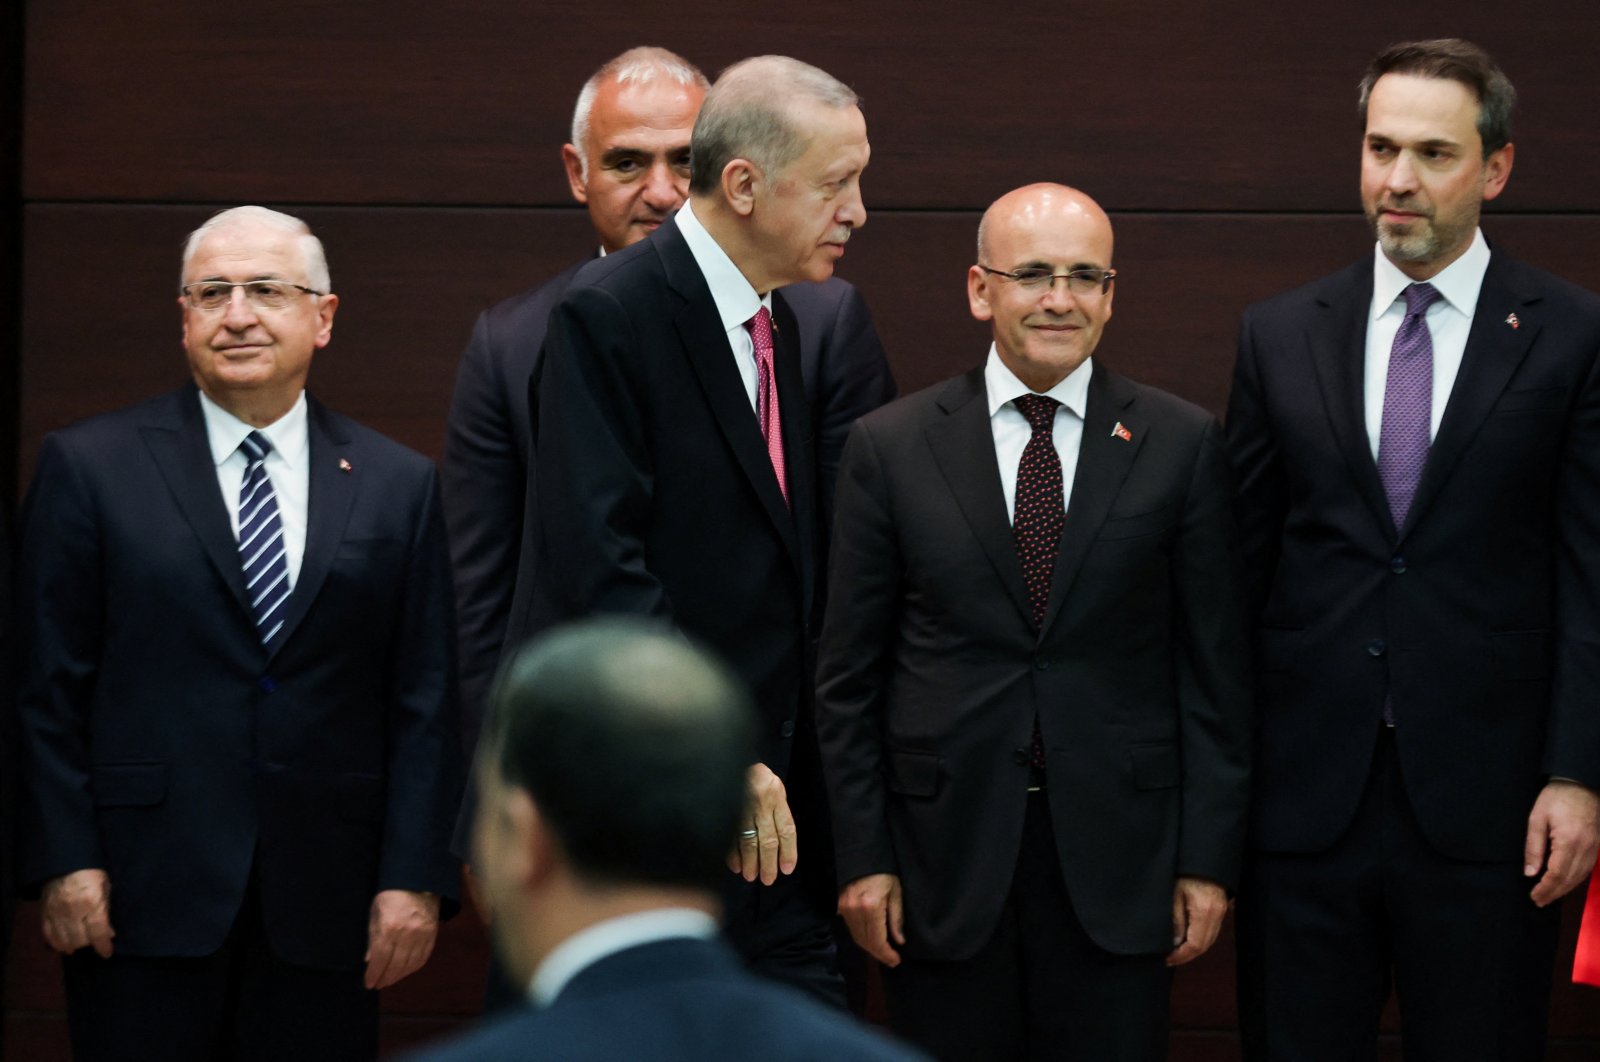 President Recep Tayyip Erdoğan walks next to the new Treasury and Finance Minister Mehmet Şimşek during a news conference where the new cabinet was announced, in Ankara, June 3, 2023. (Reuters Photo)